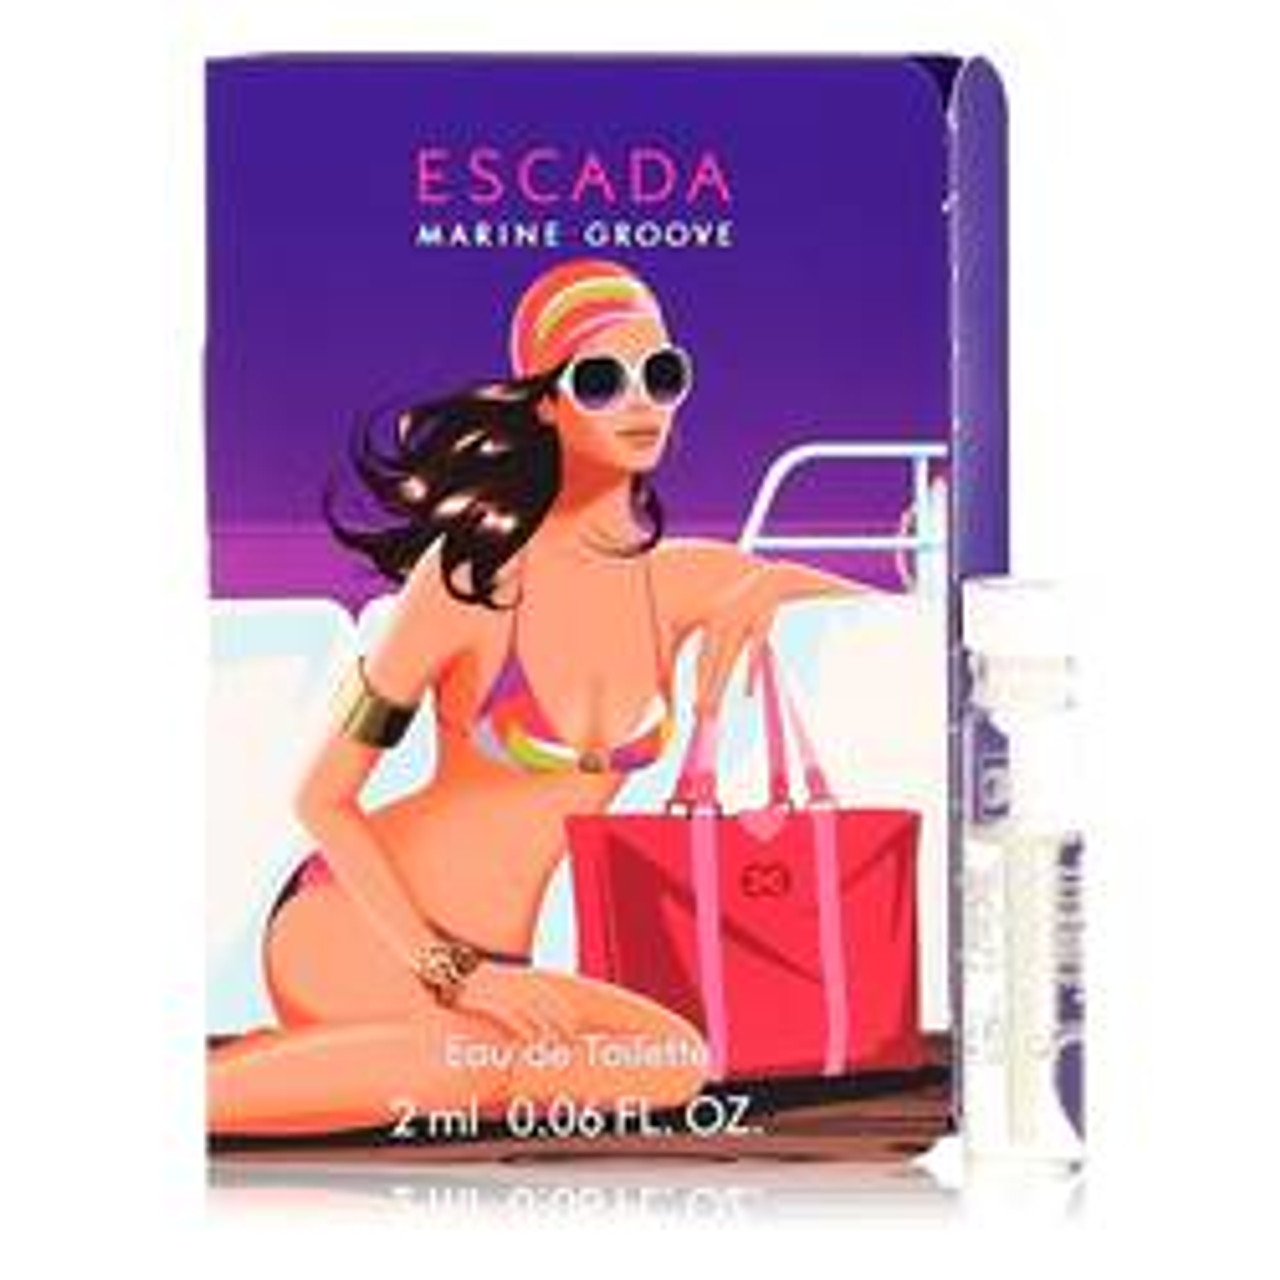 Escada Marine Groove Perfume By Escada Vial (sample) 0.06 oz for Women - [From 7.00 - Choose pk Qty ] - *Ships from Miami